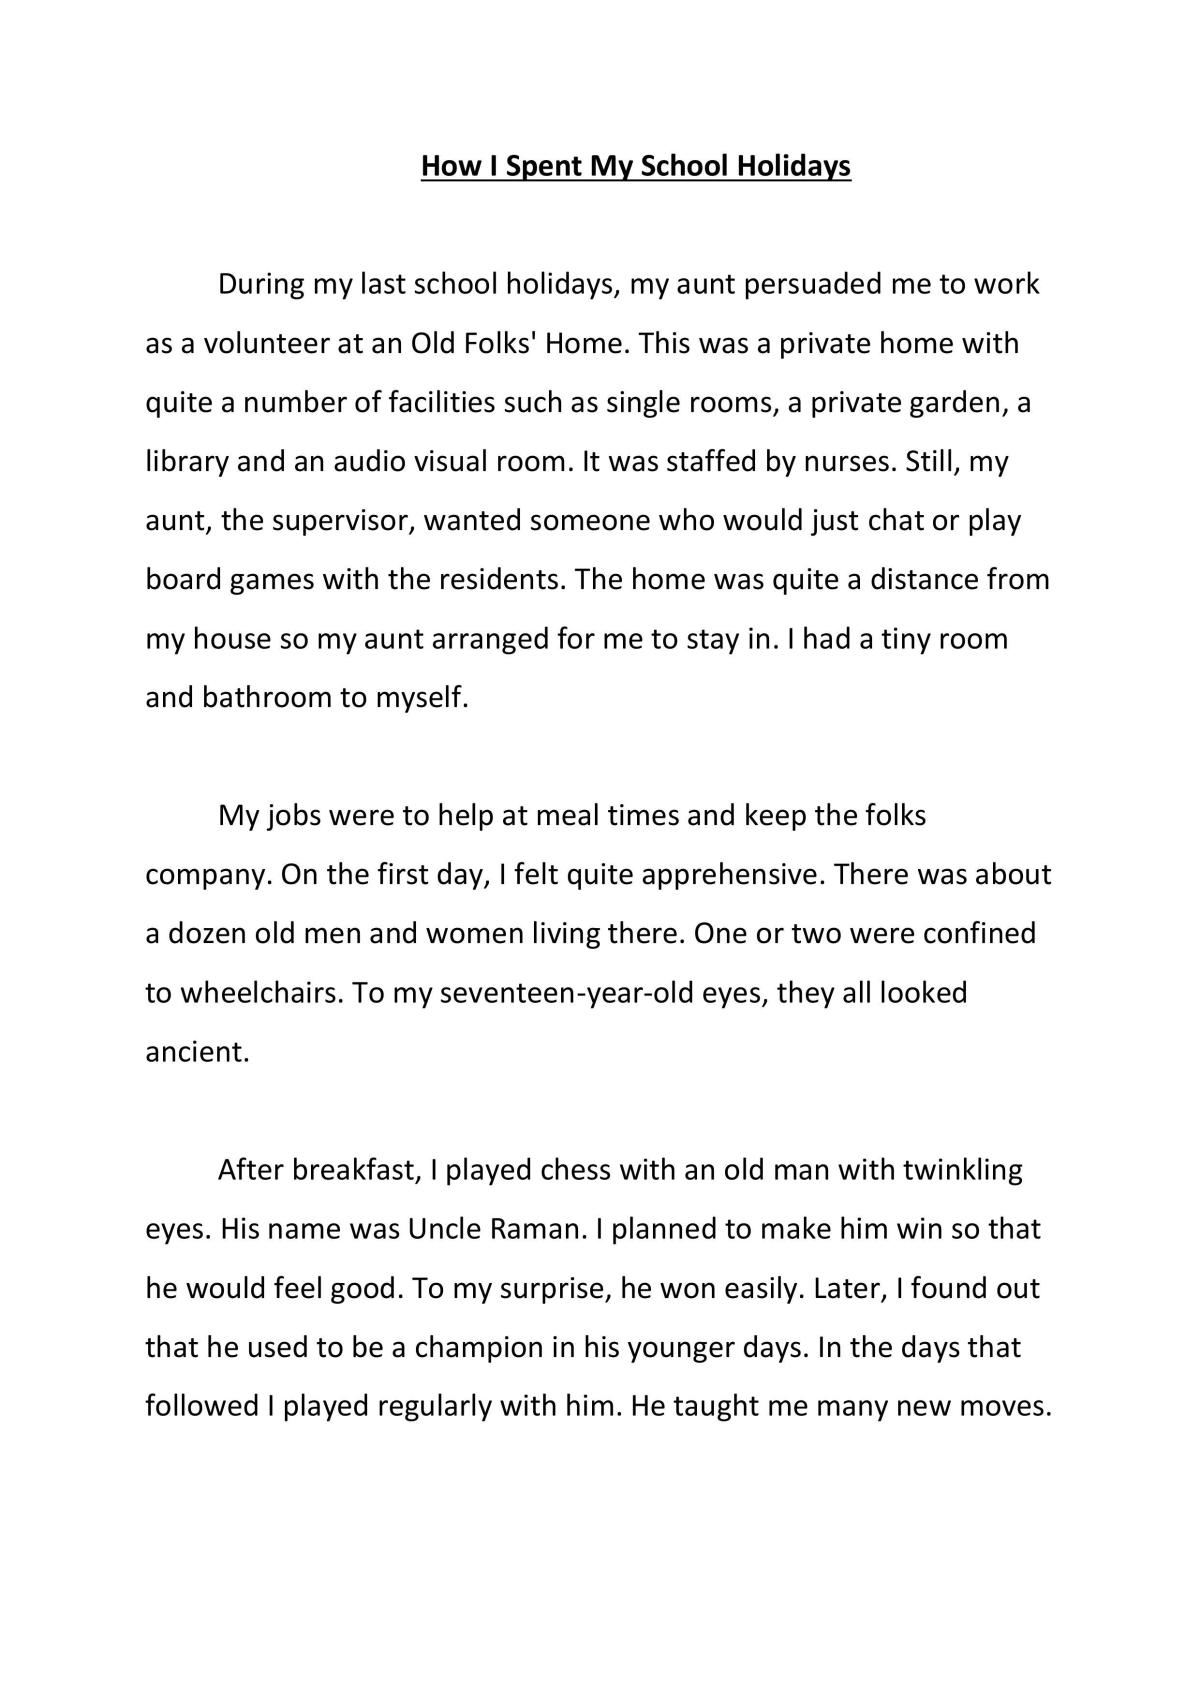 short essay about school holiday